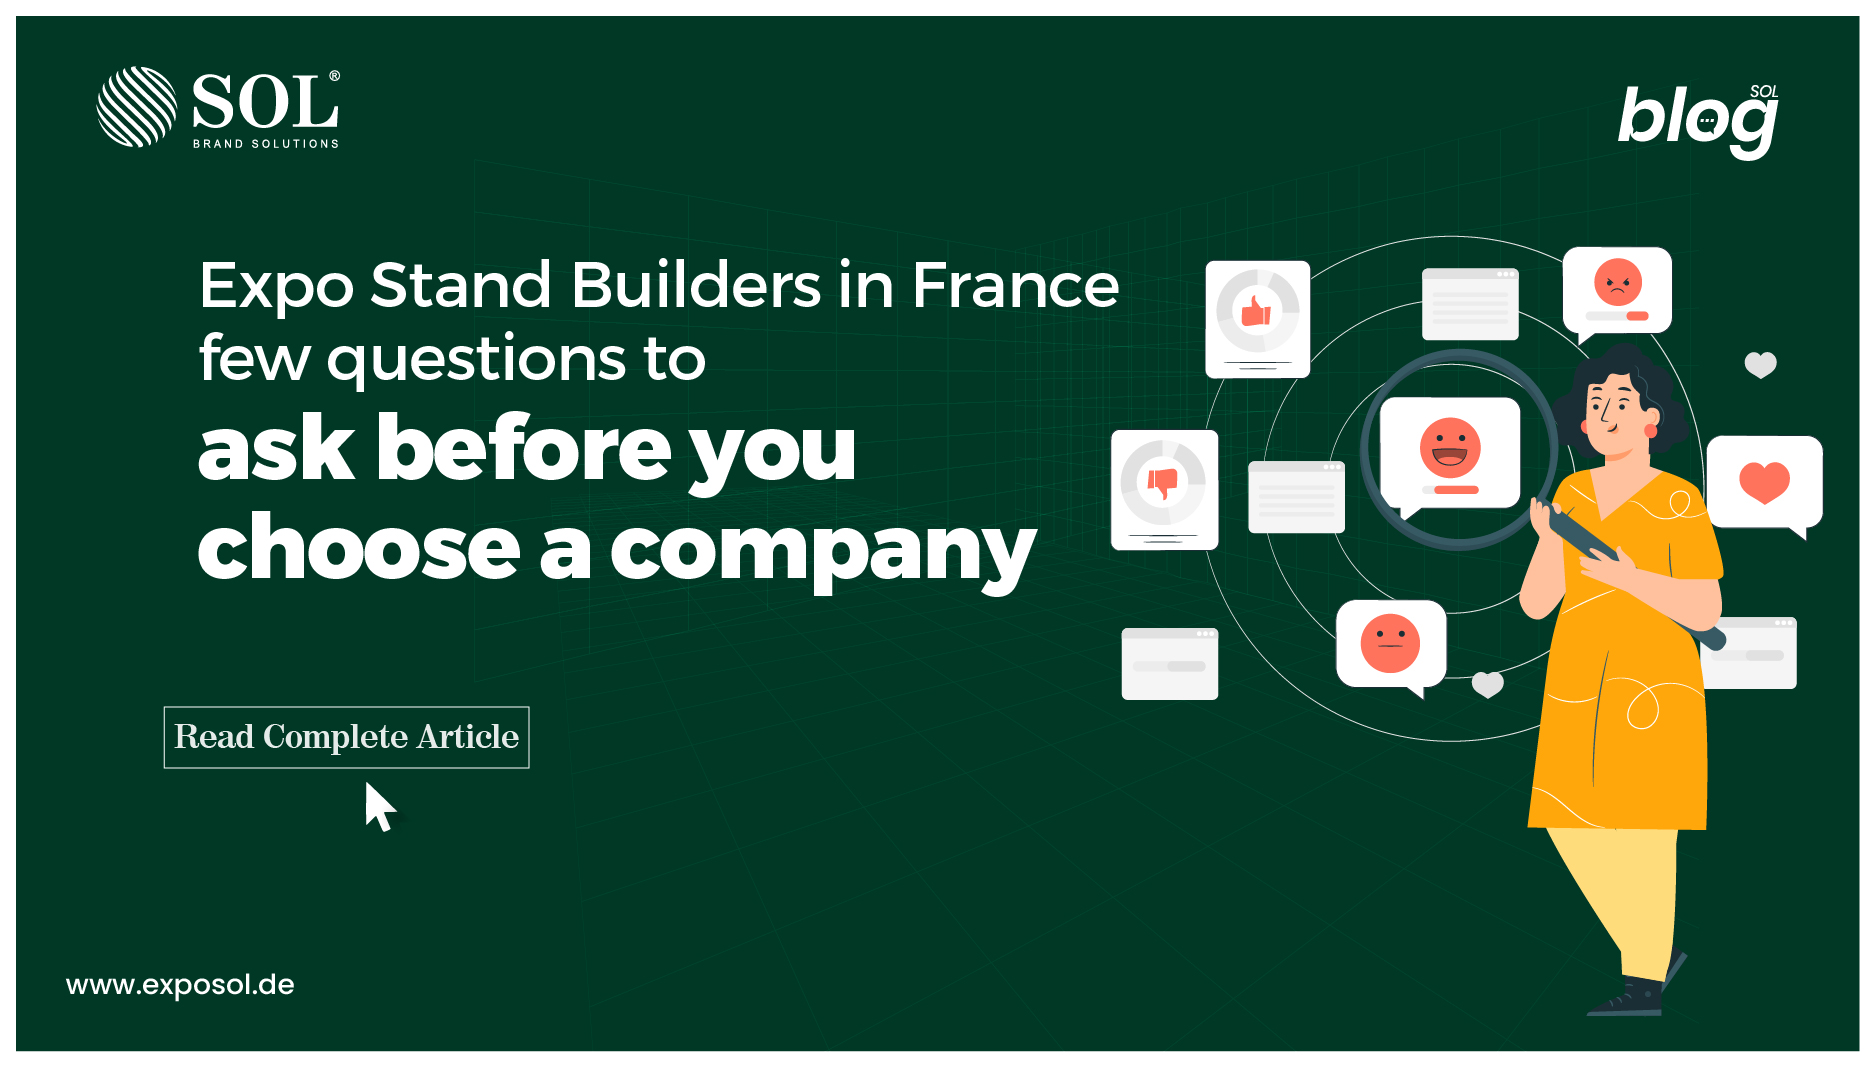 Questions to ask expo stand builders in France before hiring